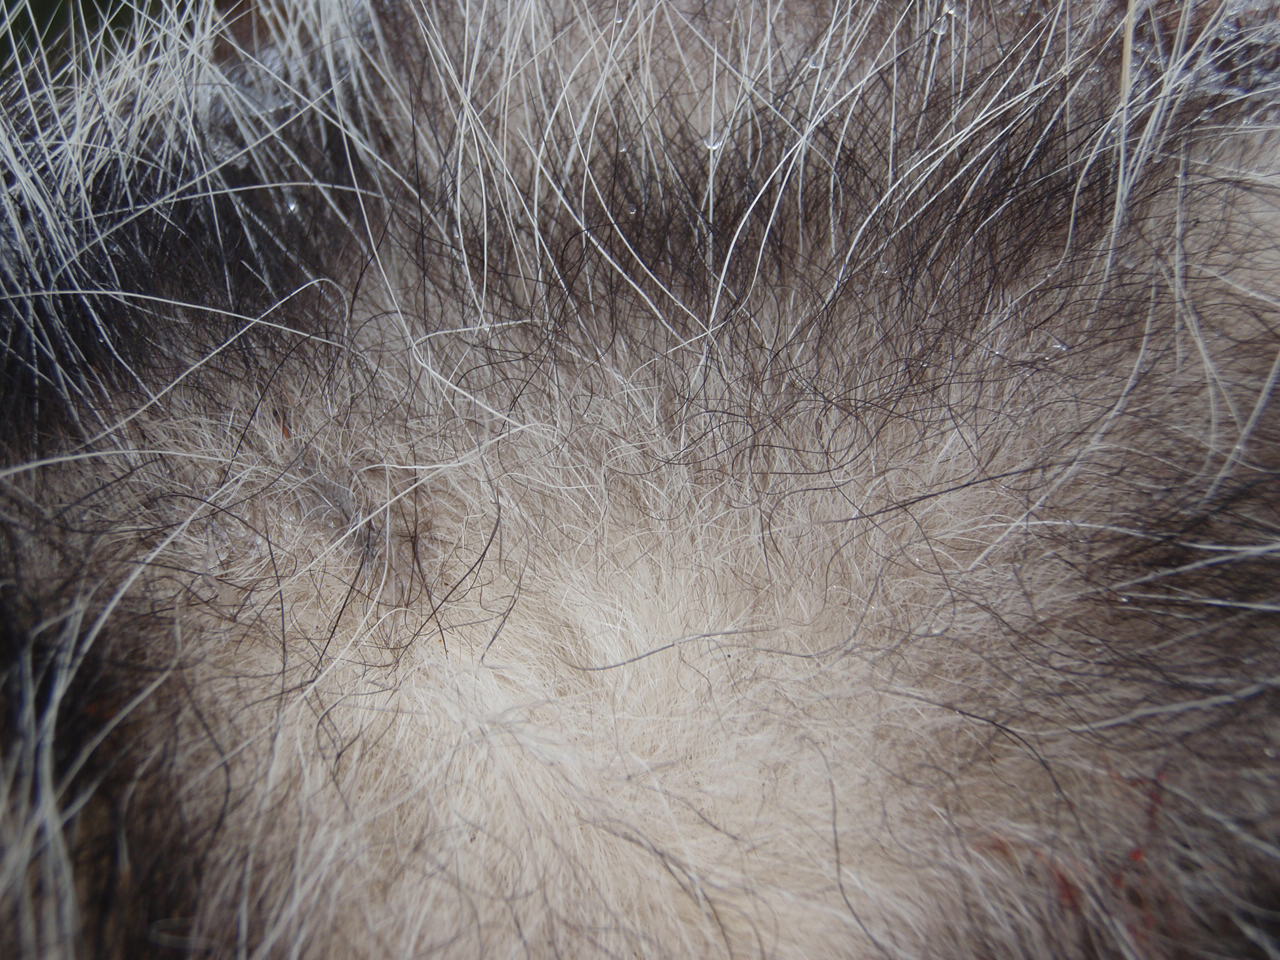 The hairs that grow on animal skins may have some very different names and features.